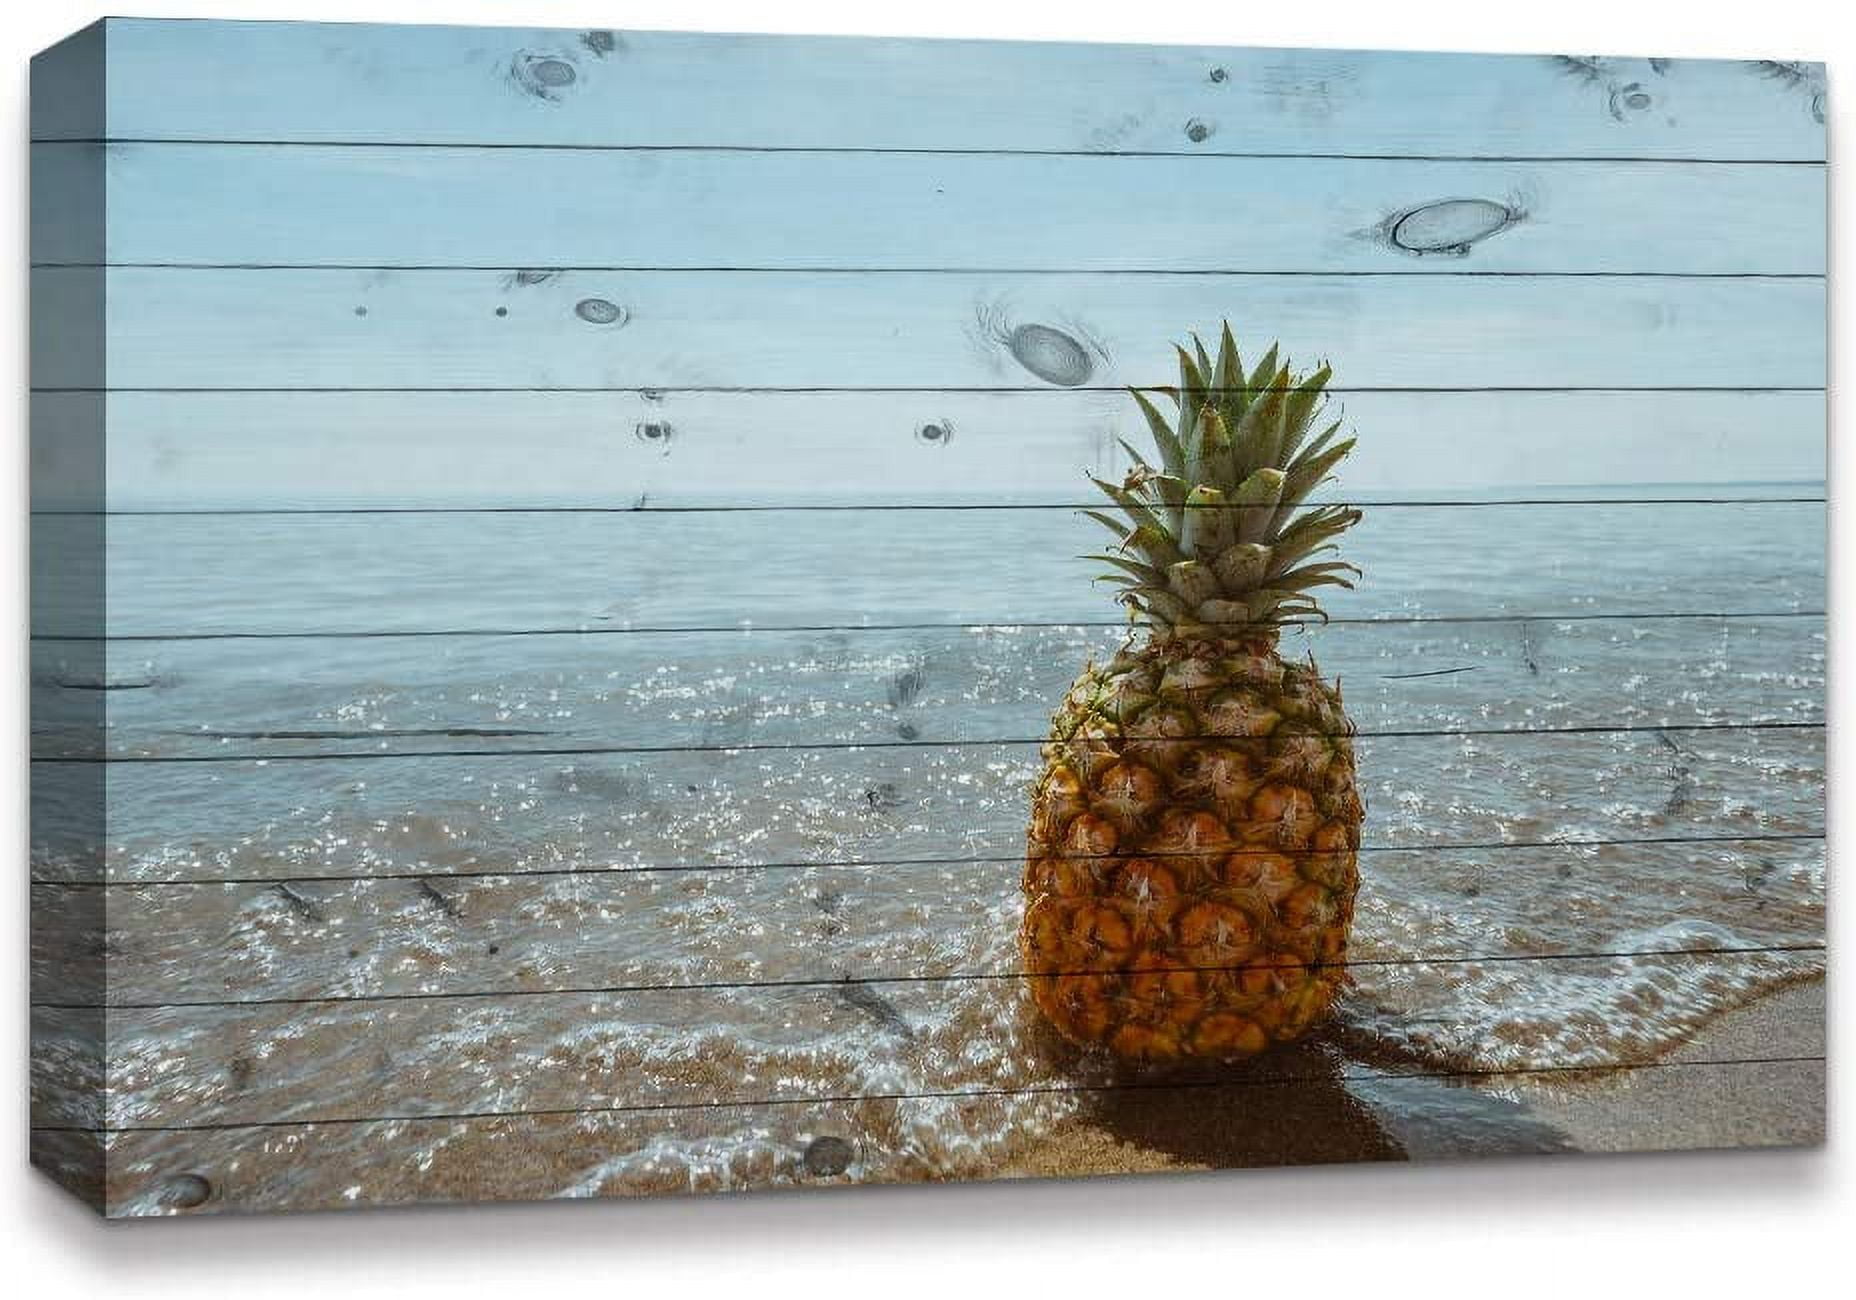 Sea Side View 24x36 Canvas wall decor at Rs 8499, Canvas Painting